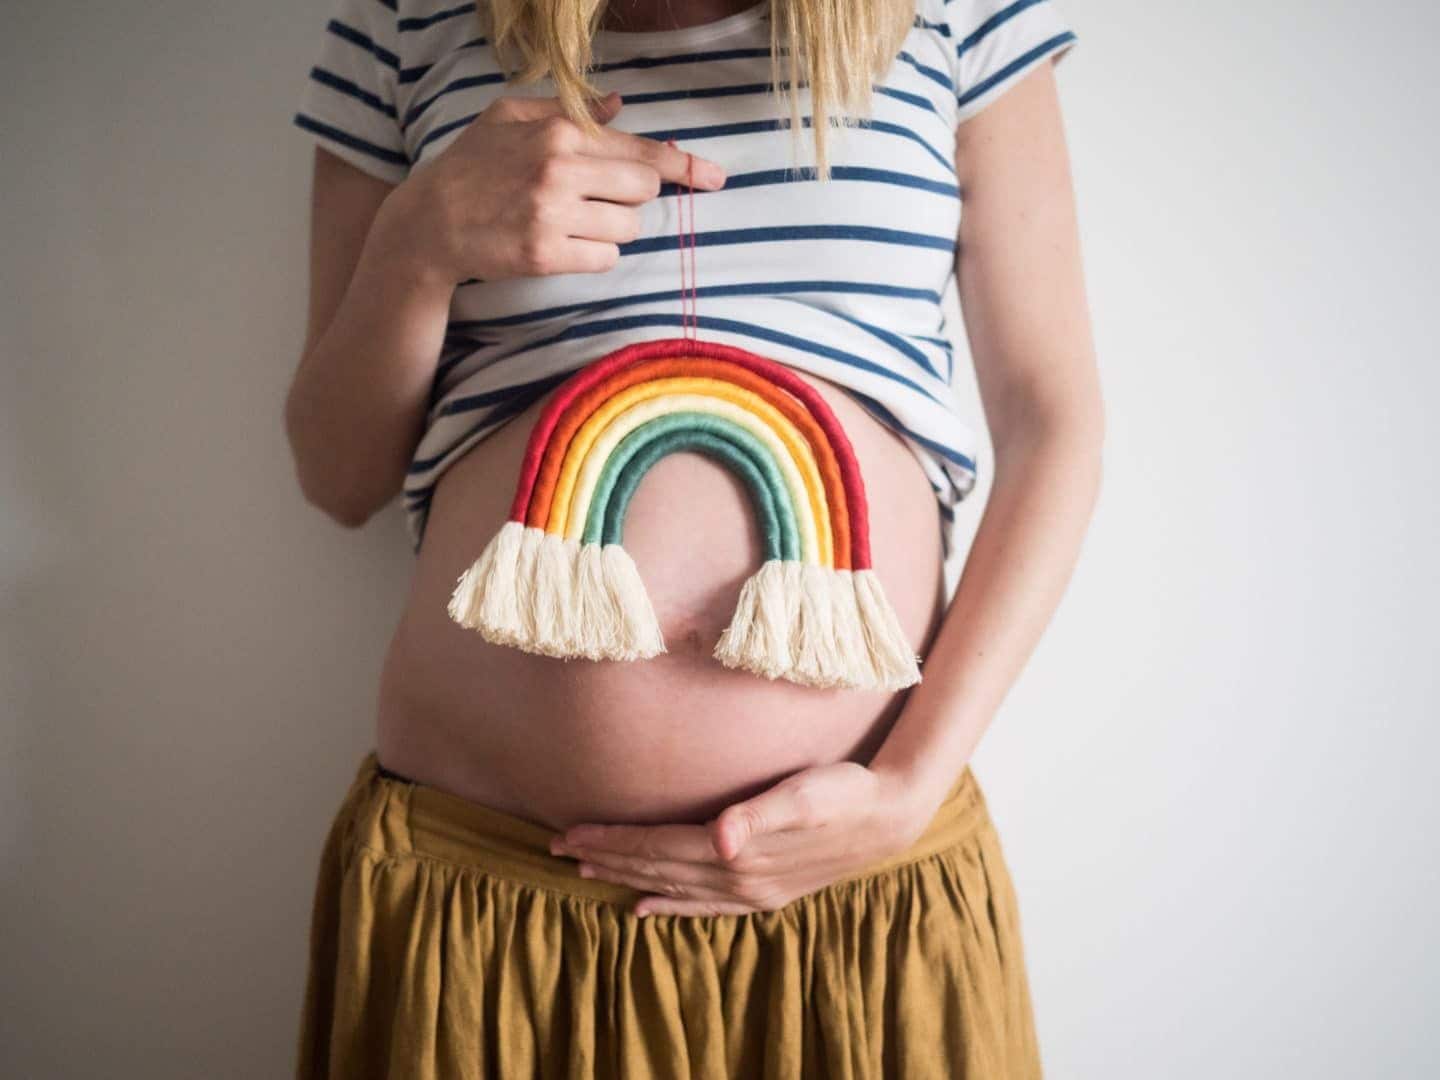 Rainbow Baby: Origin, Meaning, and What It Means to Parents